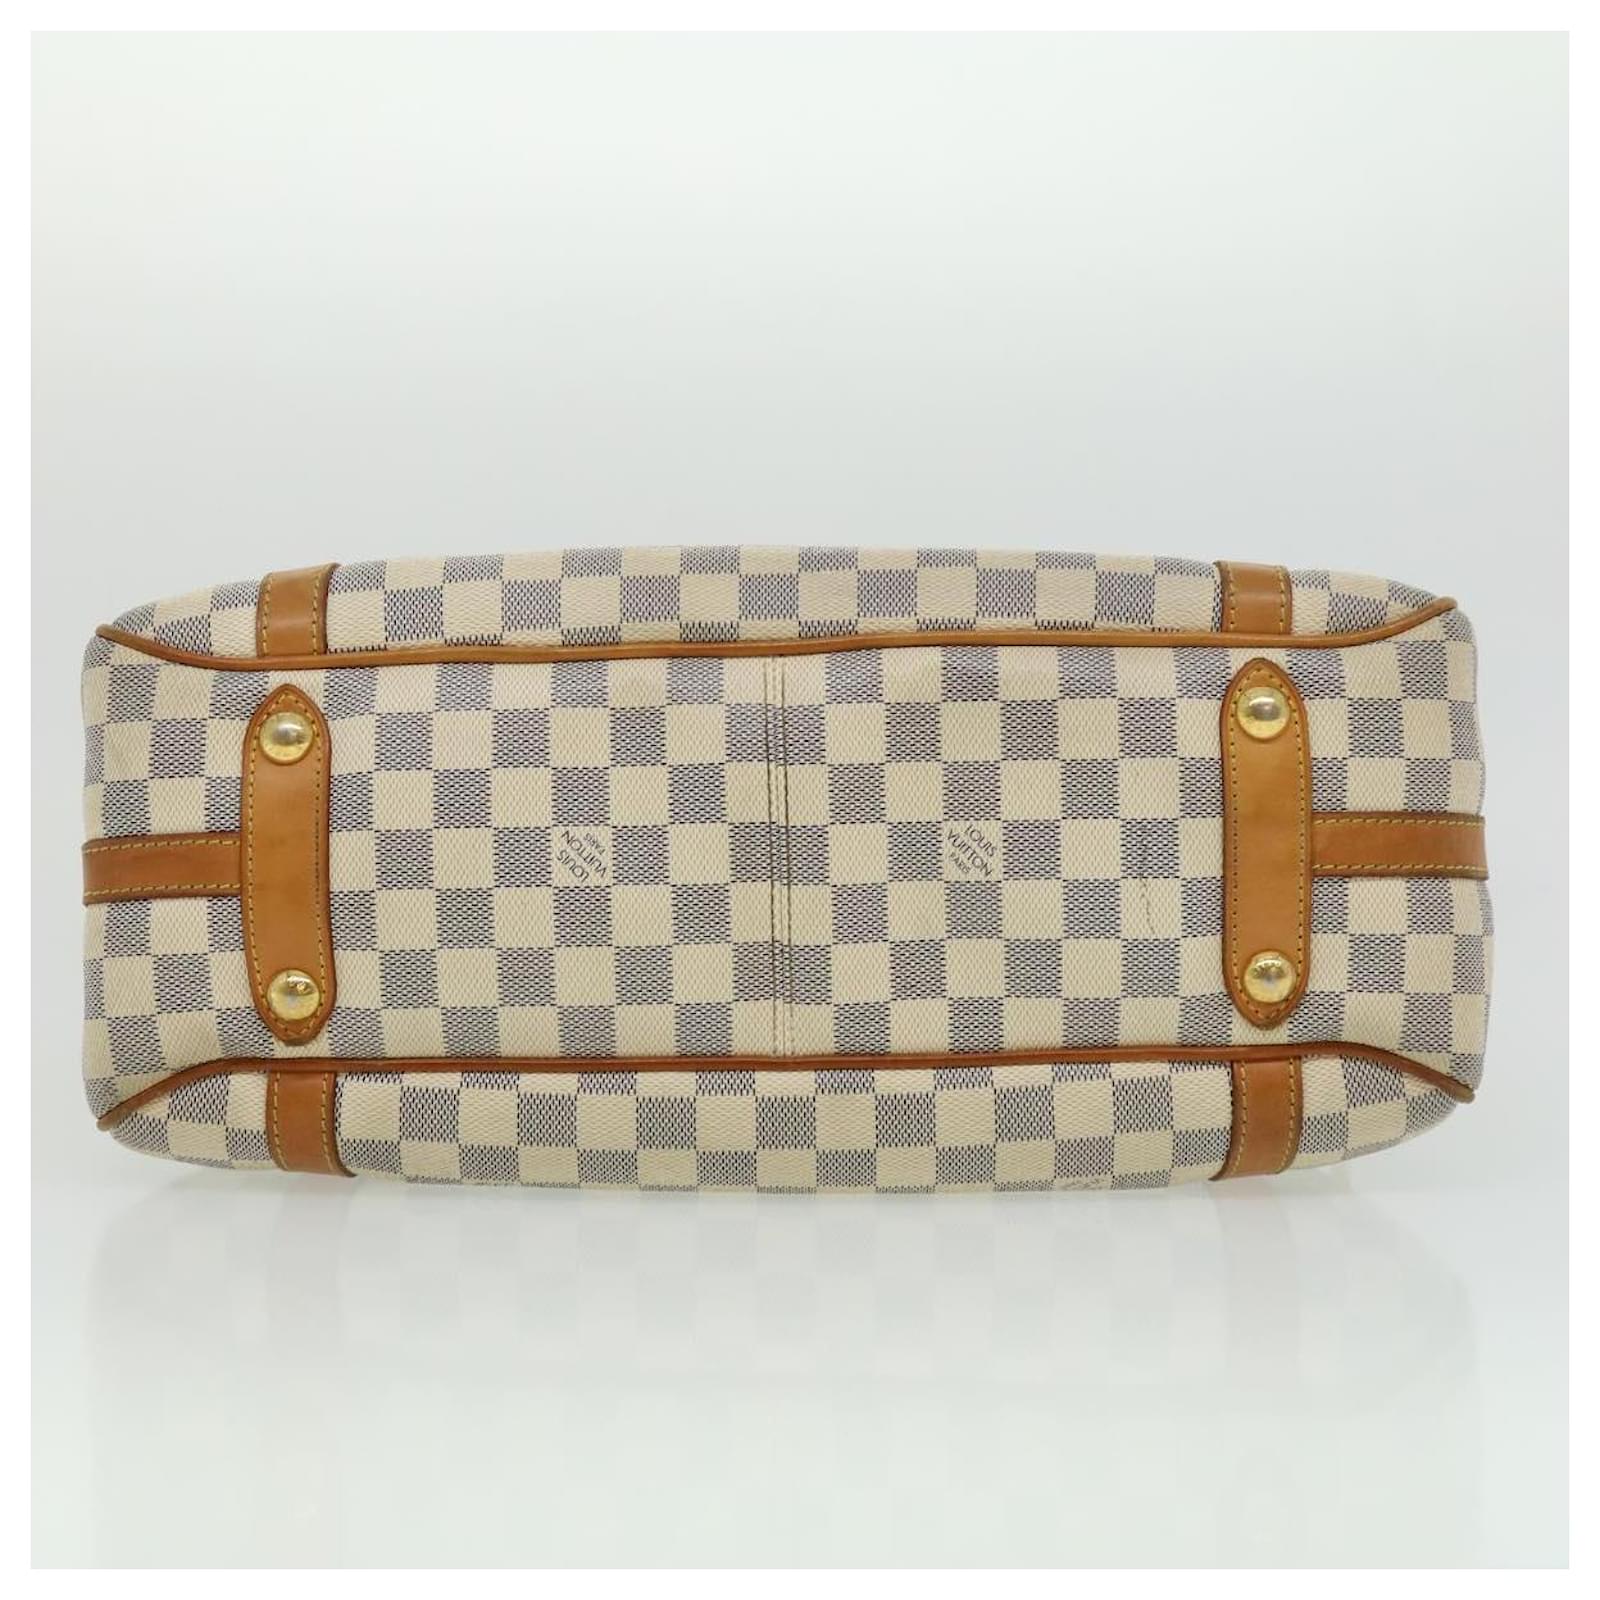 Louis Vuitton Stresa Damier Azur PM All items are authentic and we